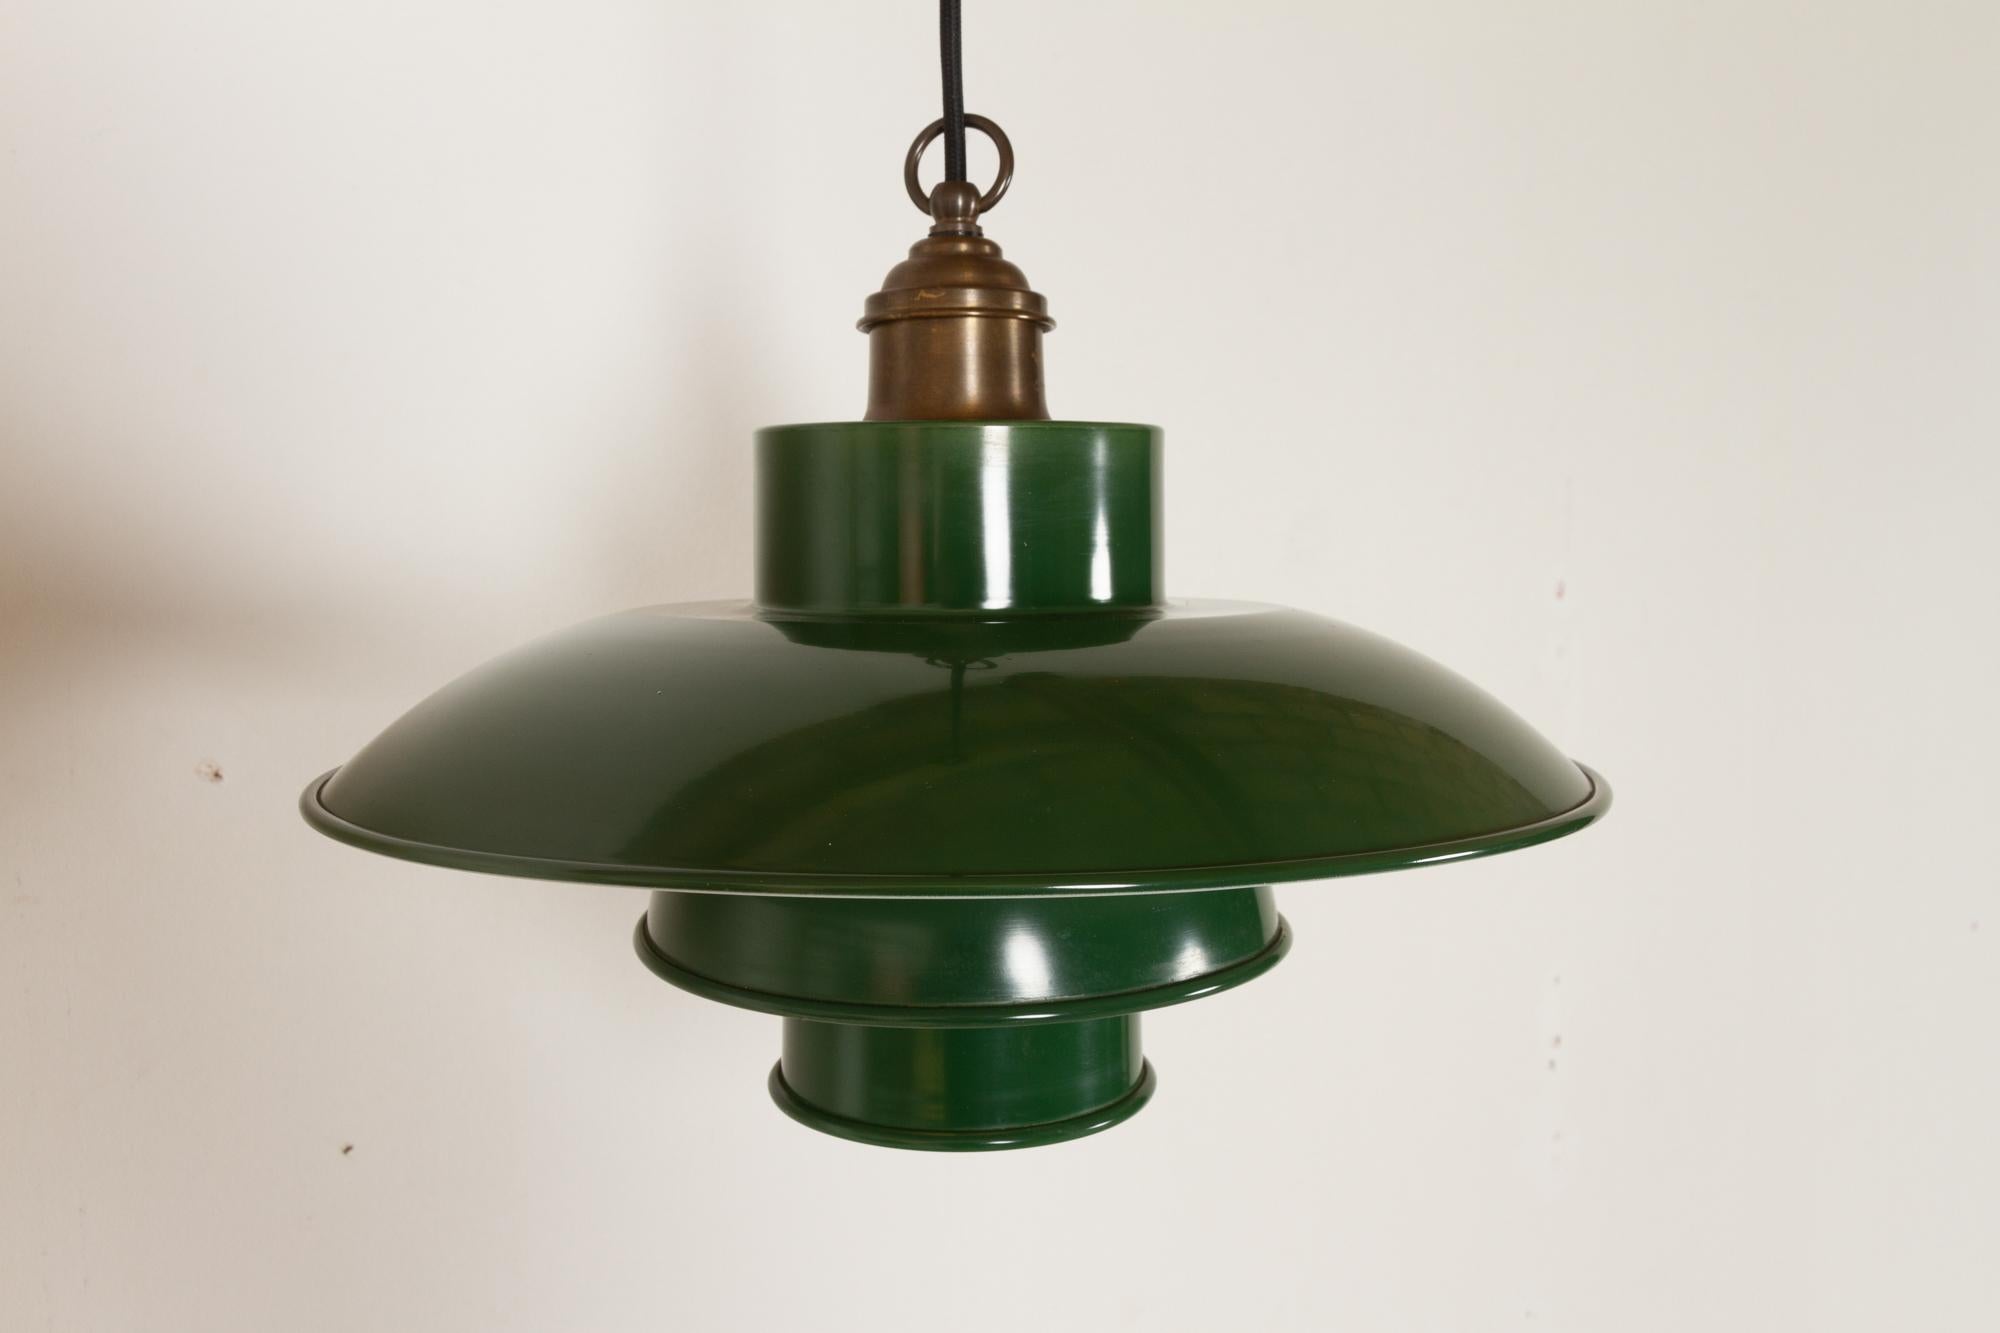 Vintage Danish green pendant 1960s
Classic Danish Mid-Century Modern ceiling pendant in green enamelled metal. Three shades with white undersides disperses the light in all directions without blinding. Top in patinated brass. 
E26/27 socket. 220